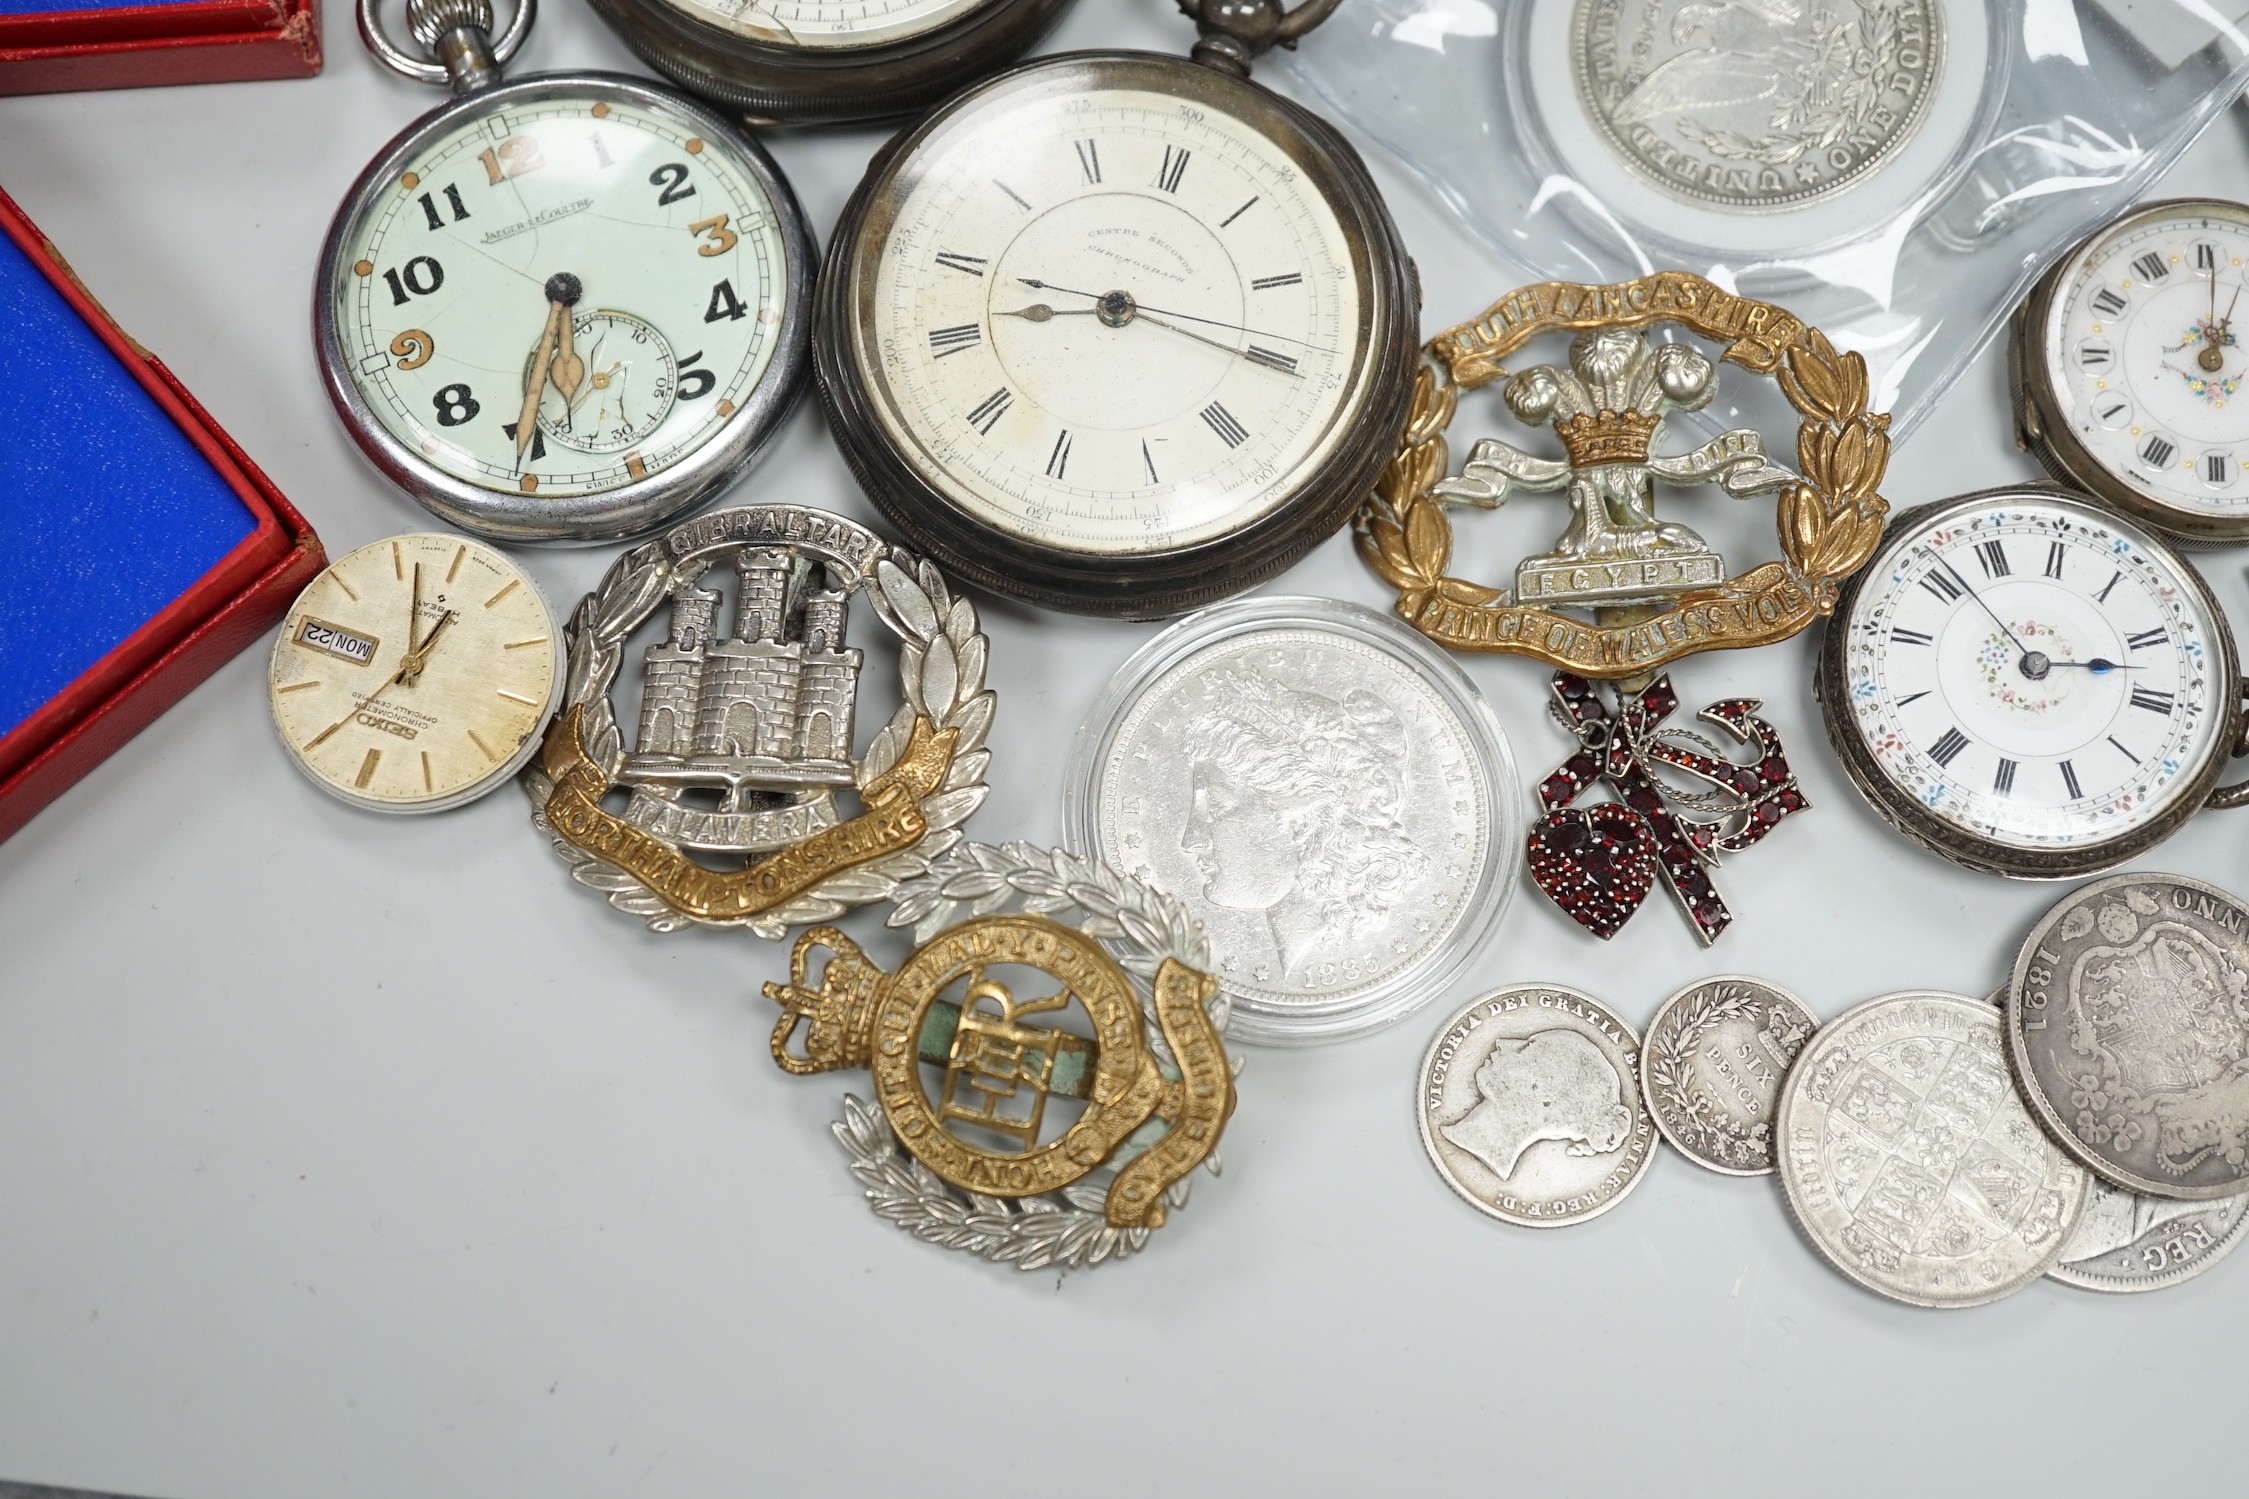 Assorted collectable items, including two silver open faced chronograph pocket watch, a chrome cased military Jaeger LeCoultre pocket watch, two wrist watches, two fob watches, assorted coins including US dollars, cap ba